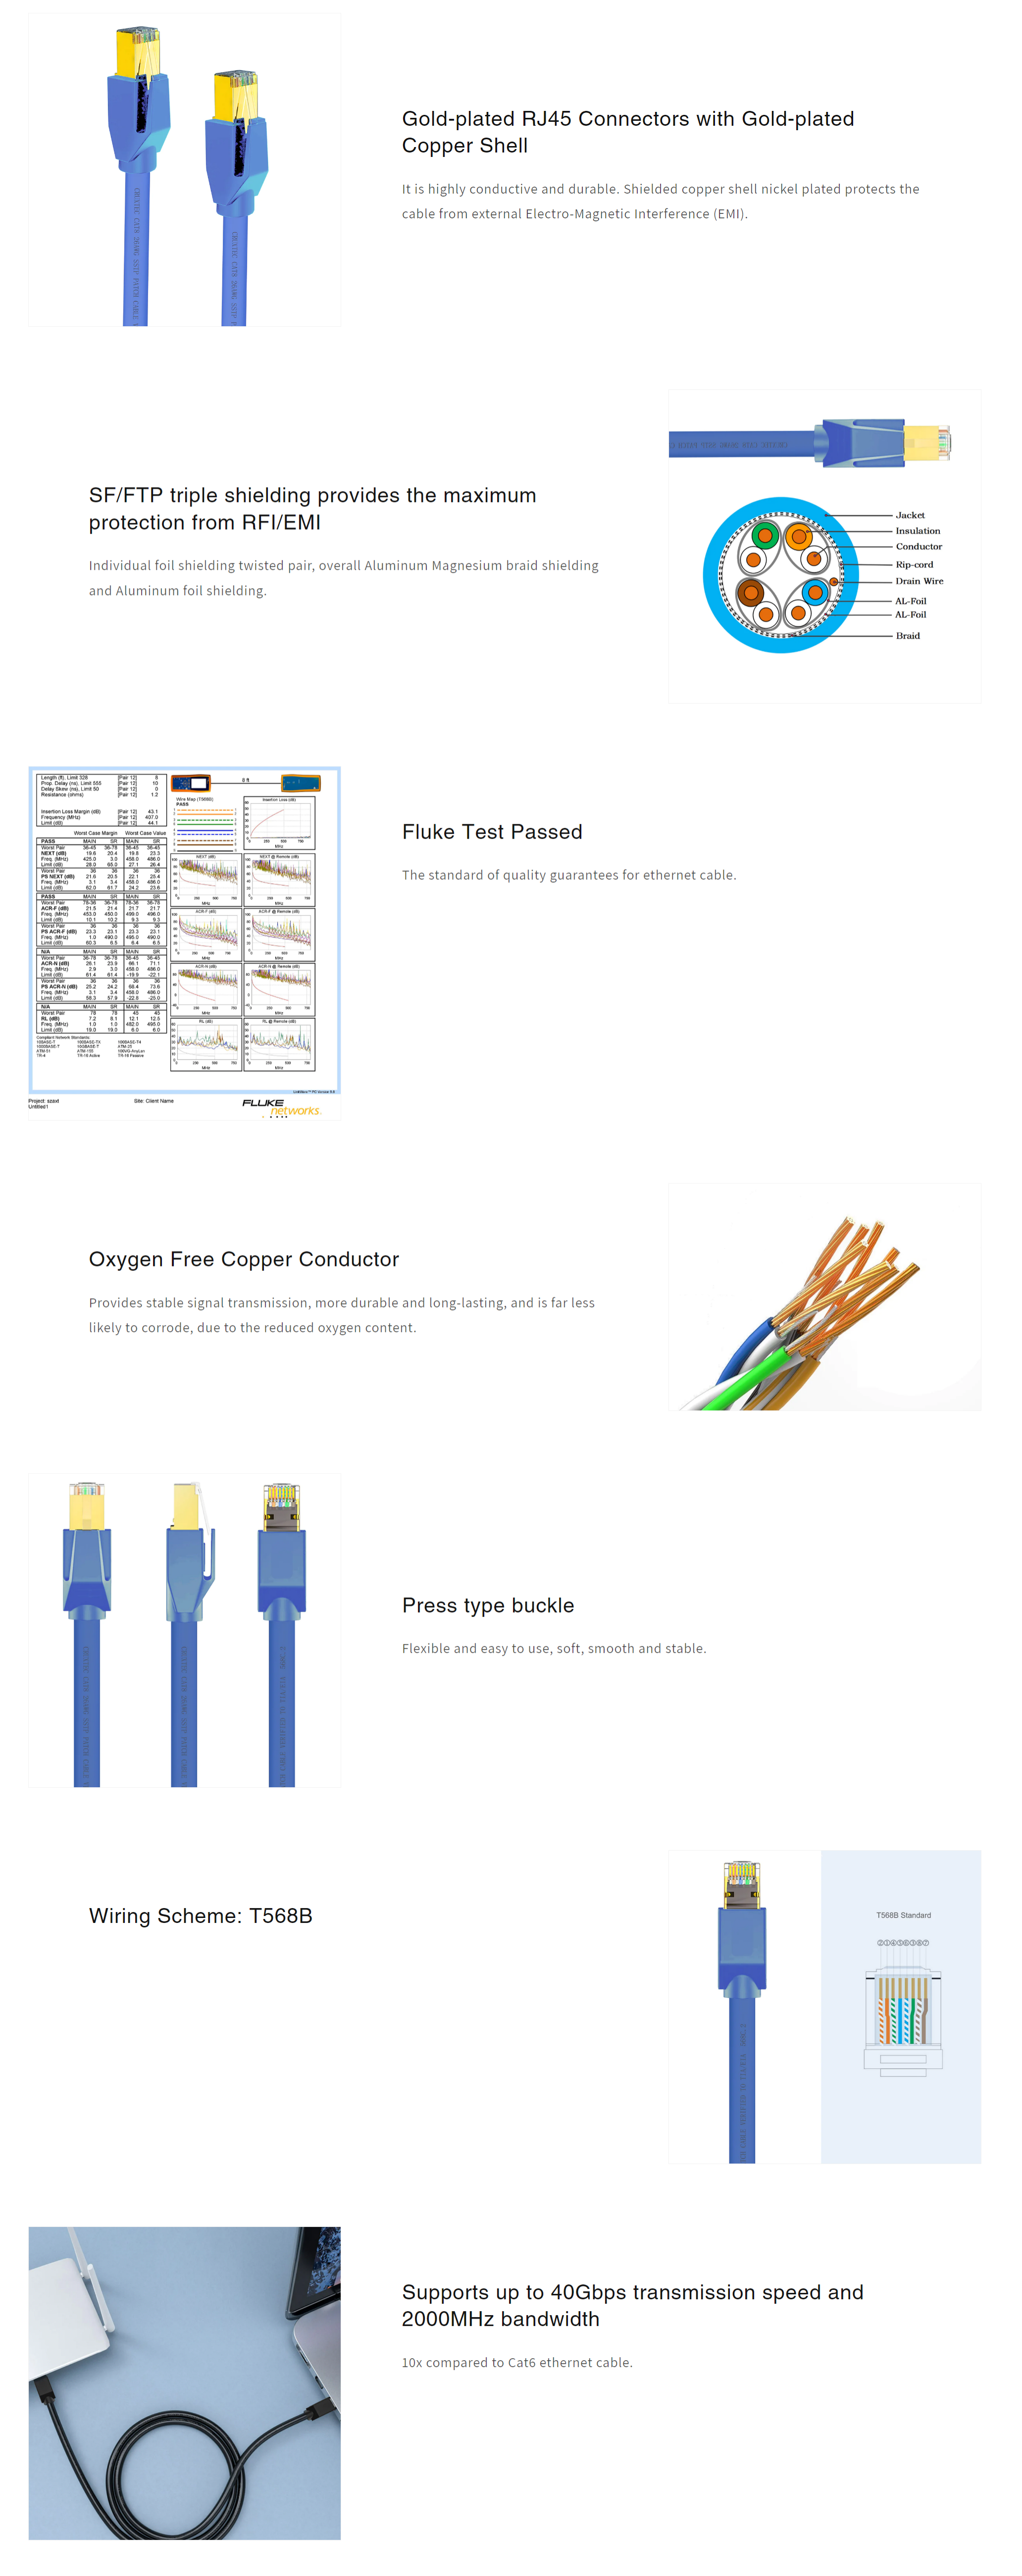 A large marketing image providing additional information about the product Cruxtec CAT8 15m 40GbE SF/FTP Triple Shielding Ethernet Cable Blue - Additional alt info not provided